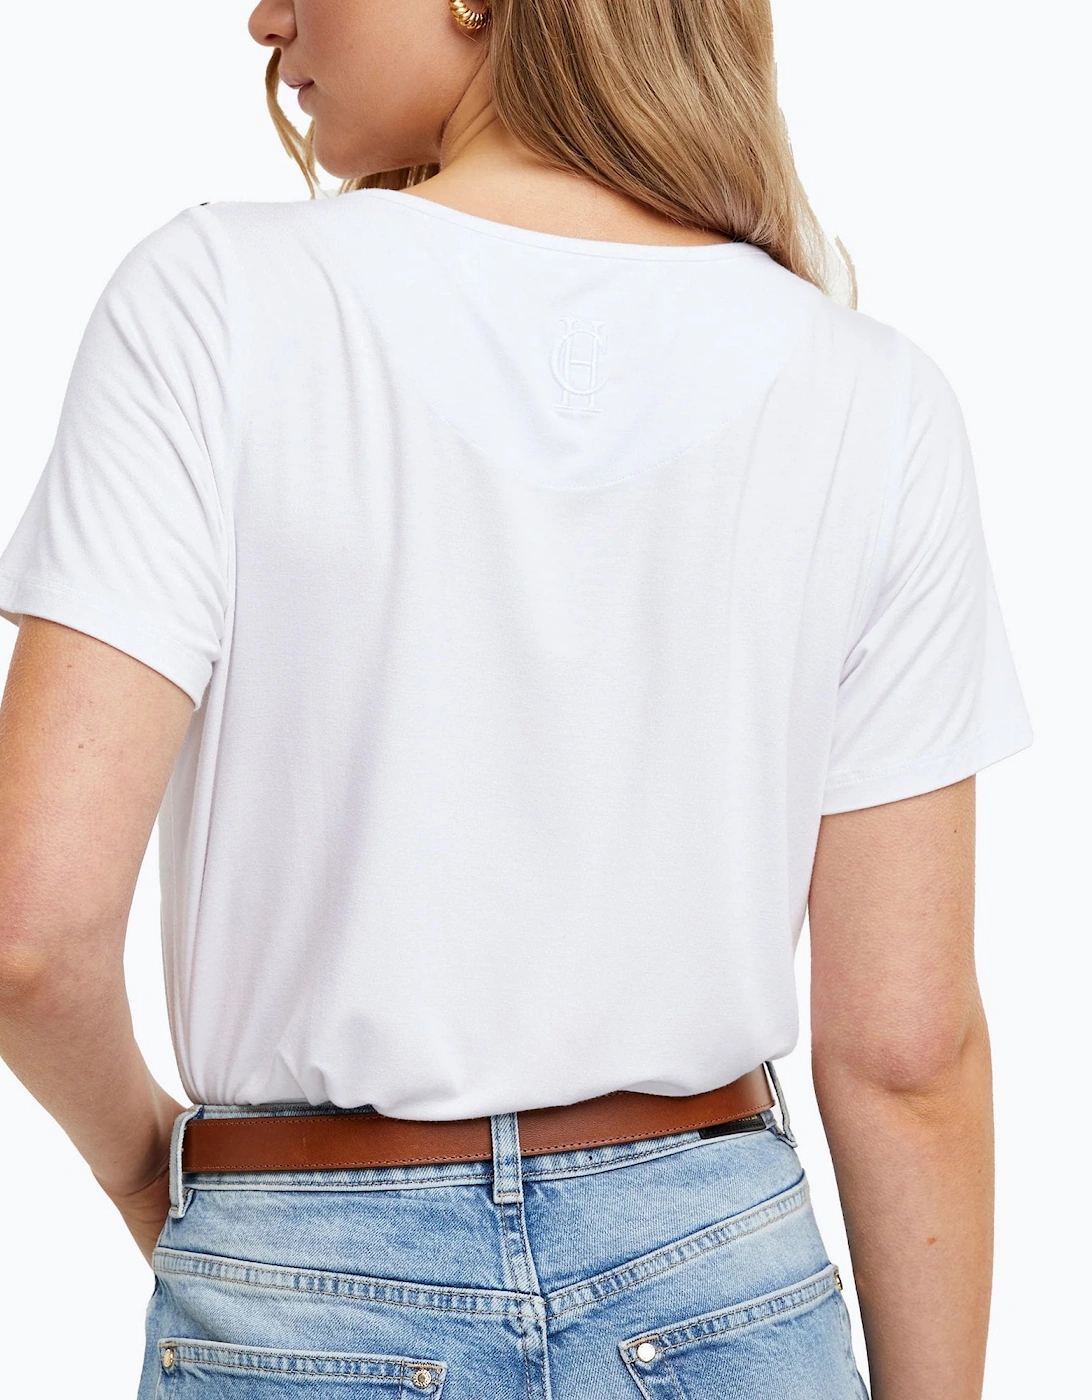 Relaxed Vee White Tee